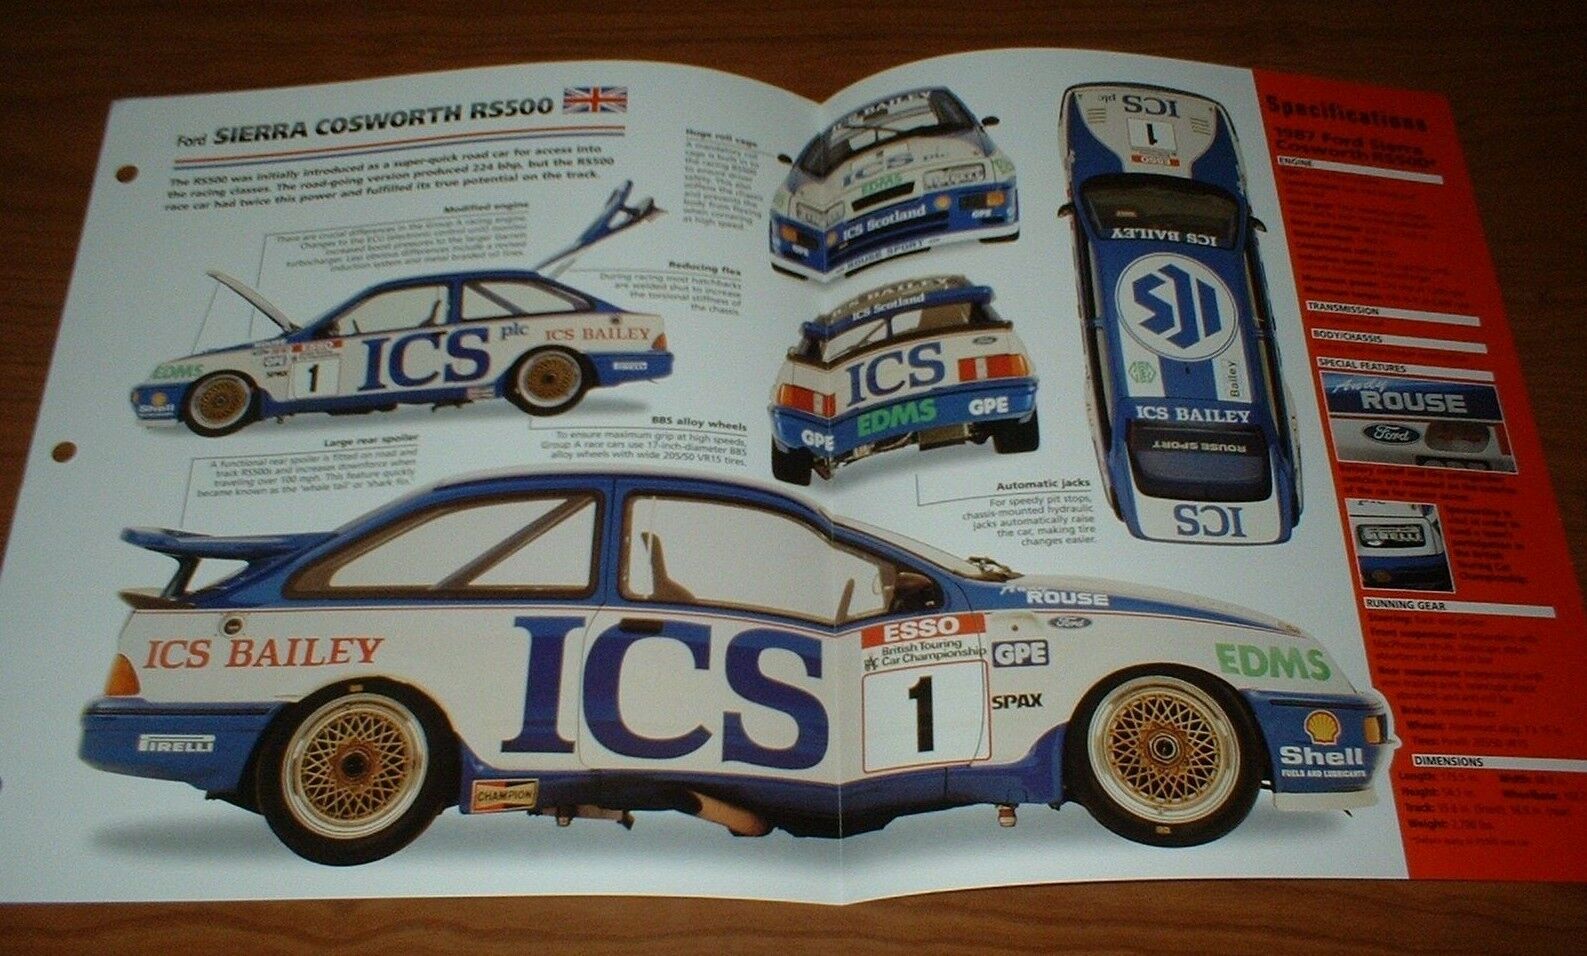 ★★1987 FORD SIERRA COSWORTH RS500 SPEC SHEET BROCHURE PHOTO POSTER PRINT RS 500★